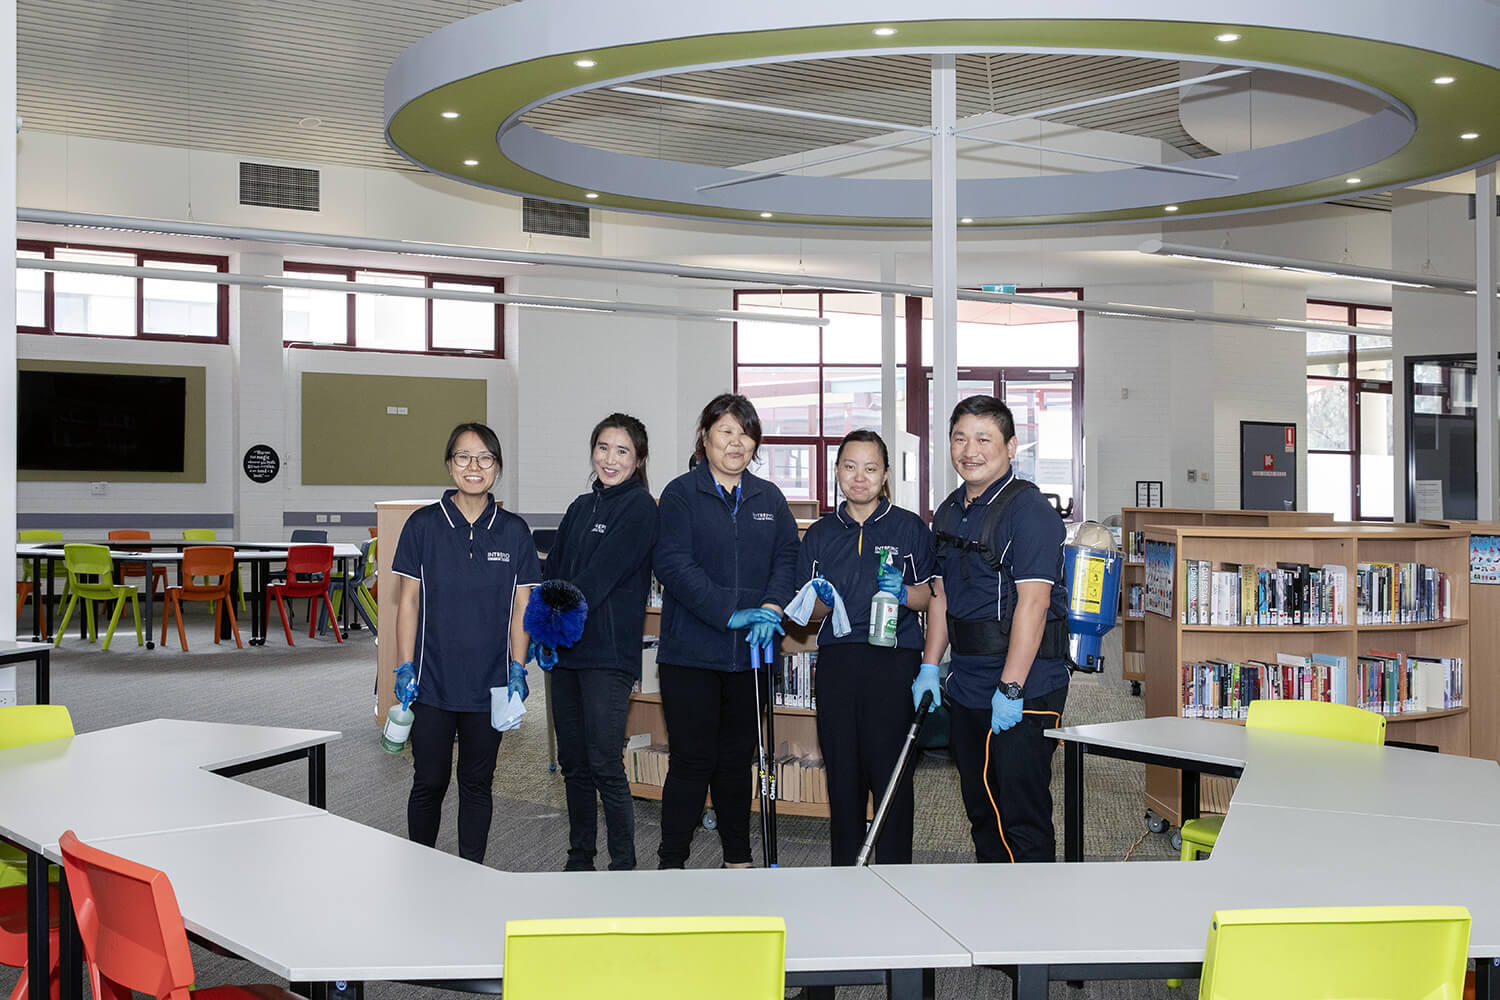 Cleaning Staff in Perth Schools